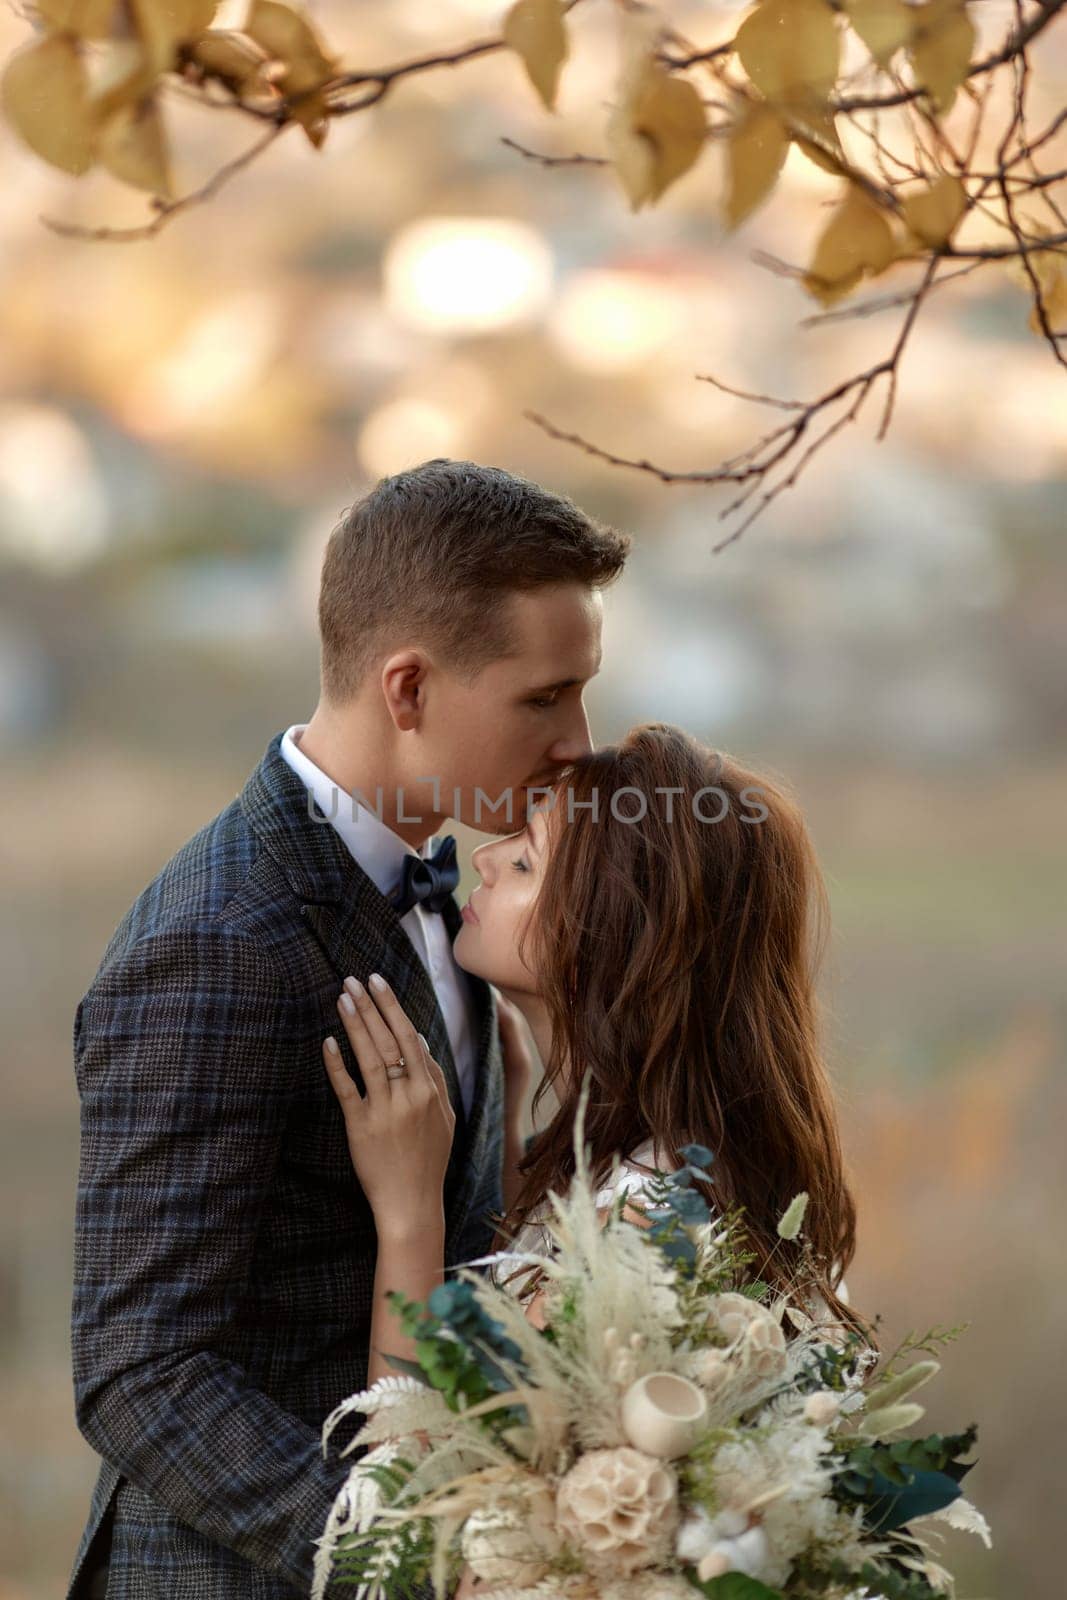 beautiful wedding couple together standing outdoor on natural background